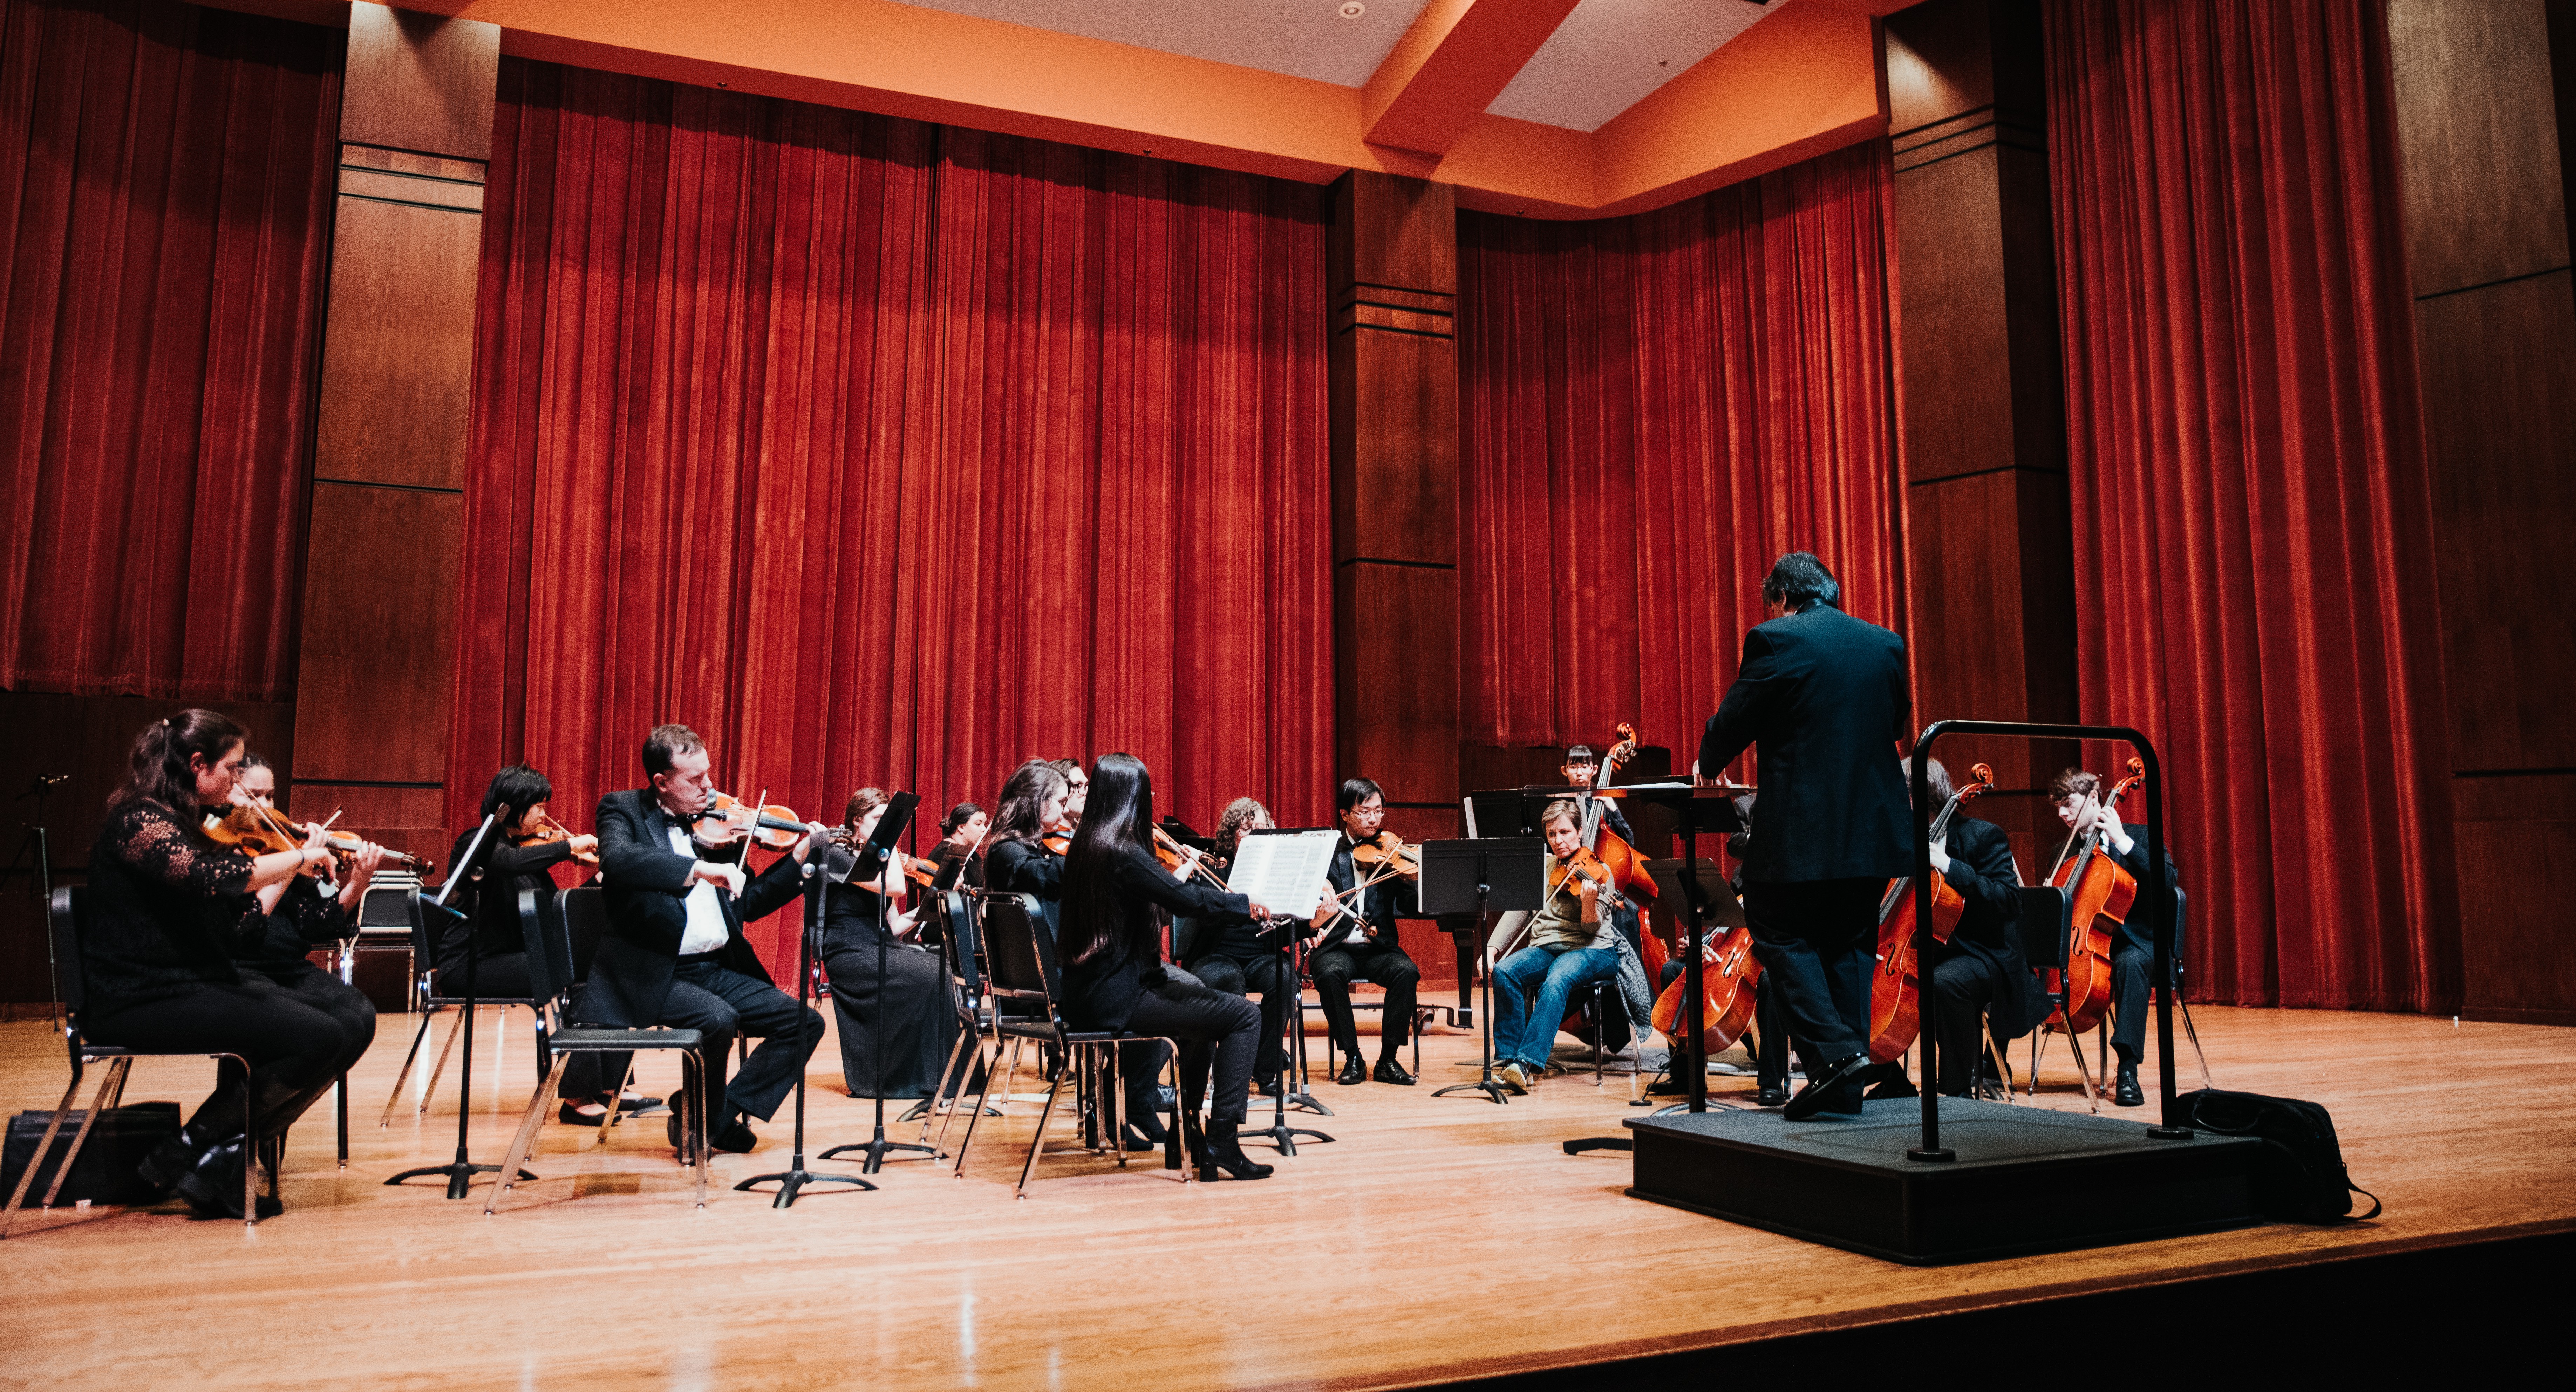 View of orchestra in Riceland Hall from the audience.